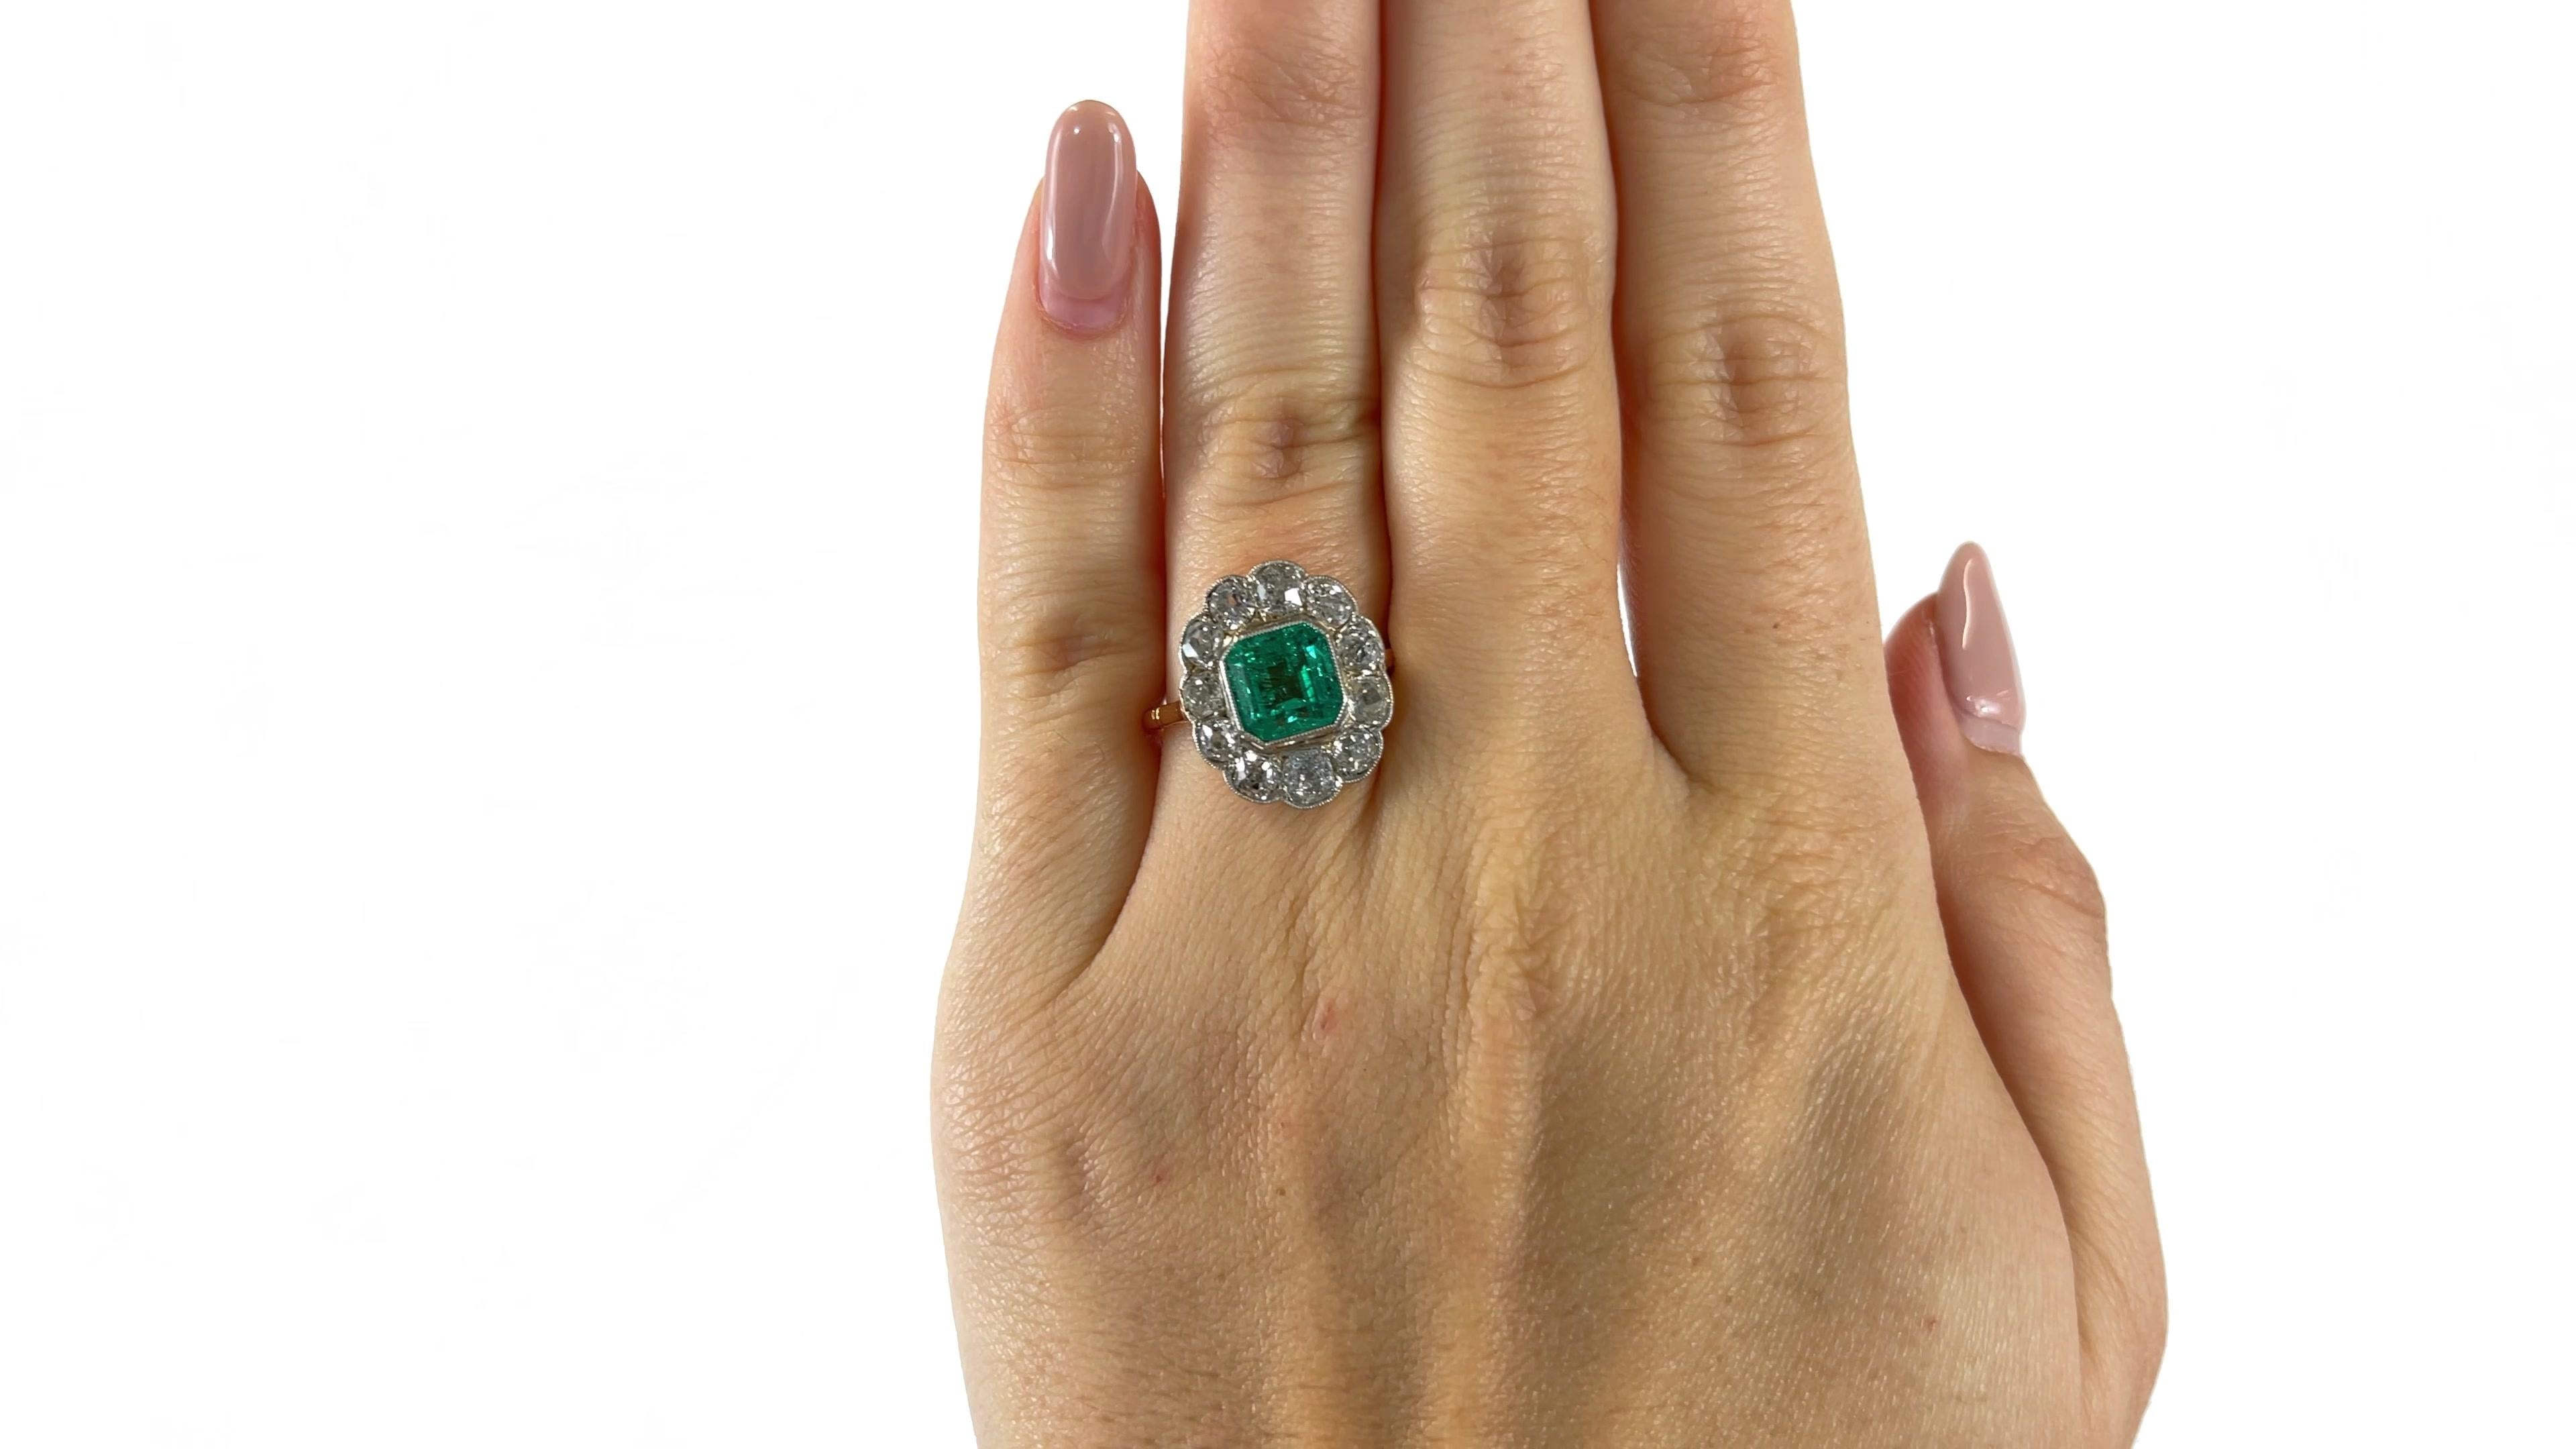 One Vintage Emerald Diamond 18 Karat Gold Ring. Featuring one square emerald weighing approximately 1.90 carat. Accented by 11 old European cut diamonds with a total weight of approximately 2.75 carats, graded I-J color, SI-I clarity. Crafted in 18